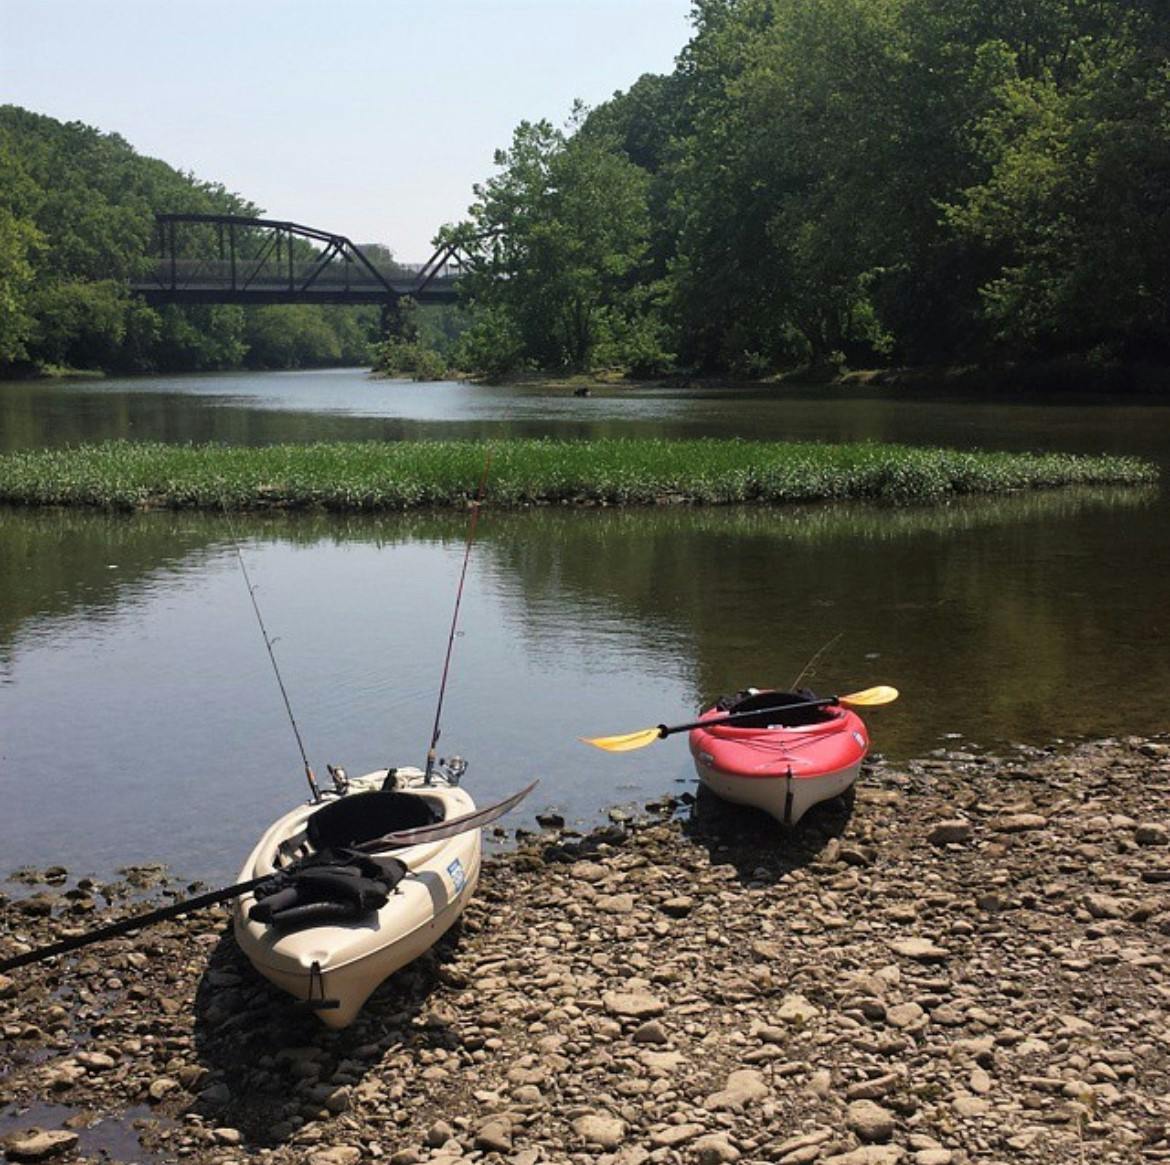 Two kayaks sit on the bank of a river. One is red and one is tan.